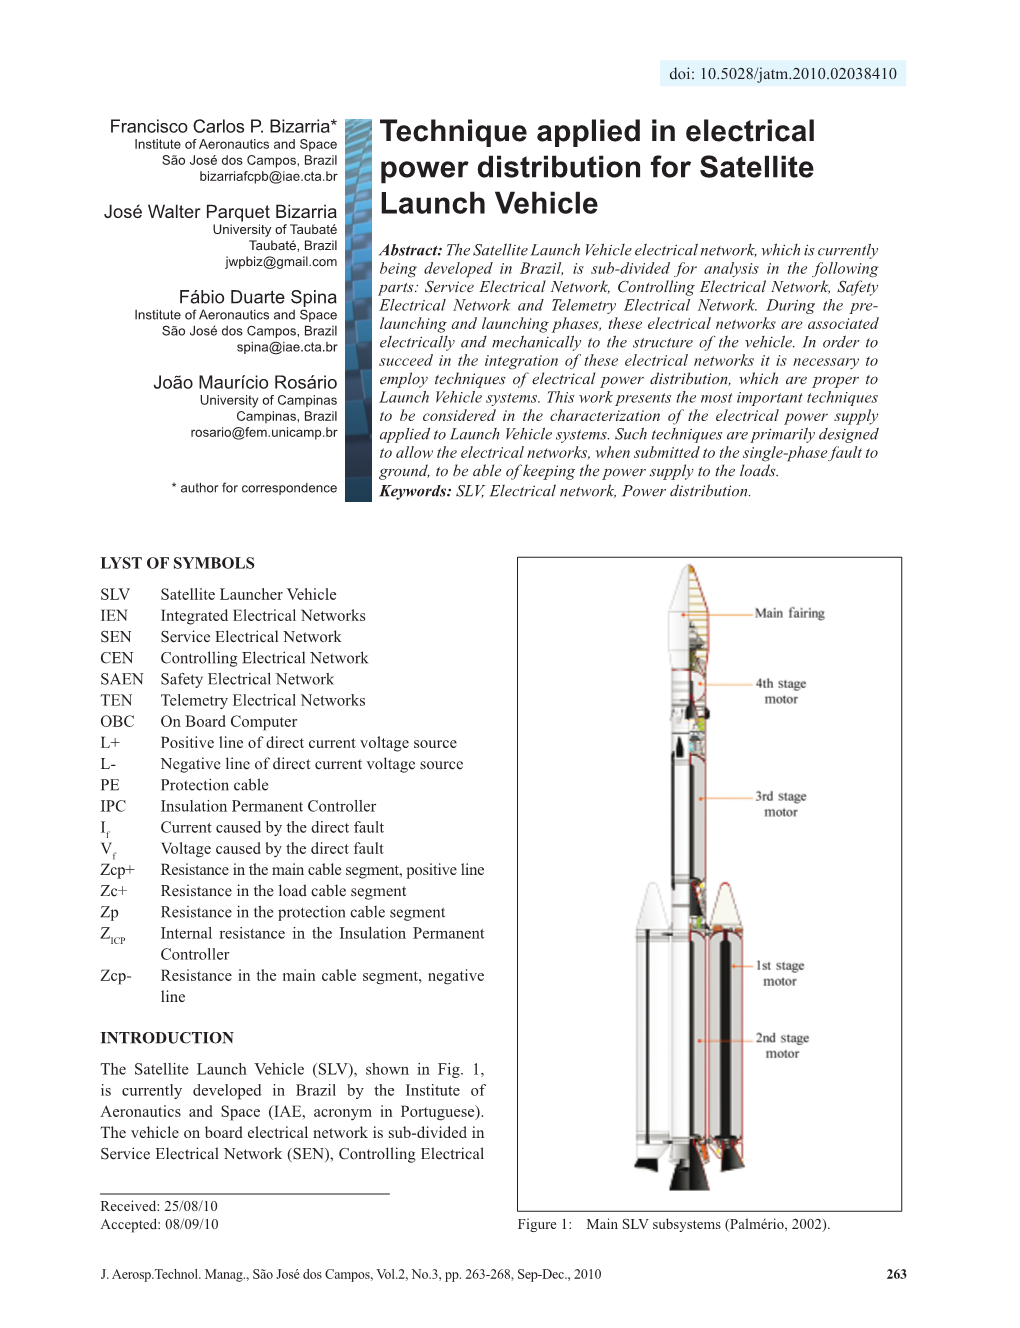 Technique Applied in Electrical Power Distribution for Satellite Launch Vehicle